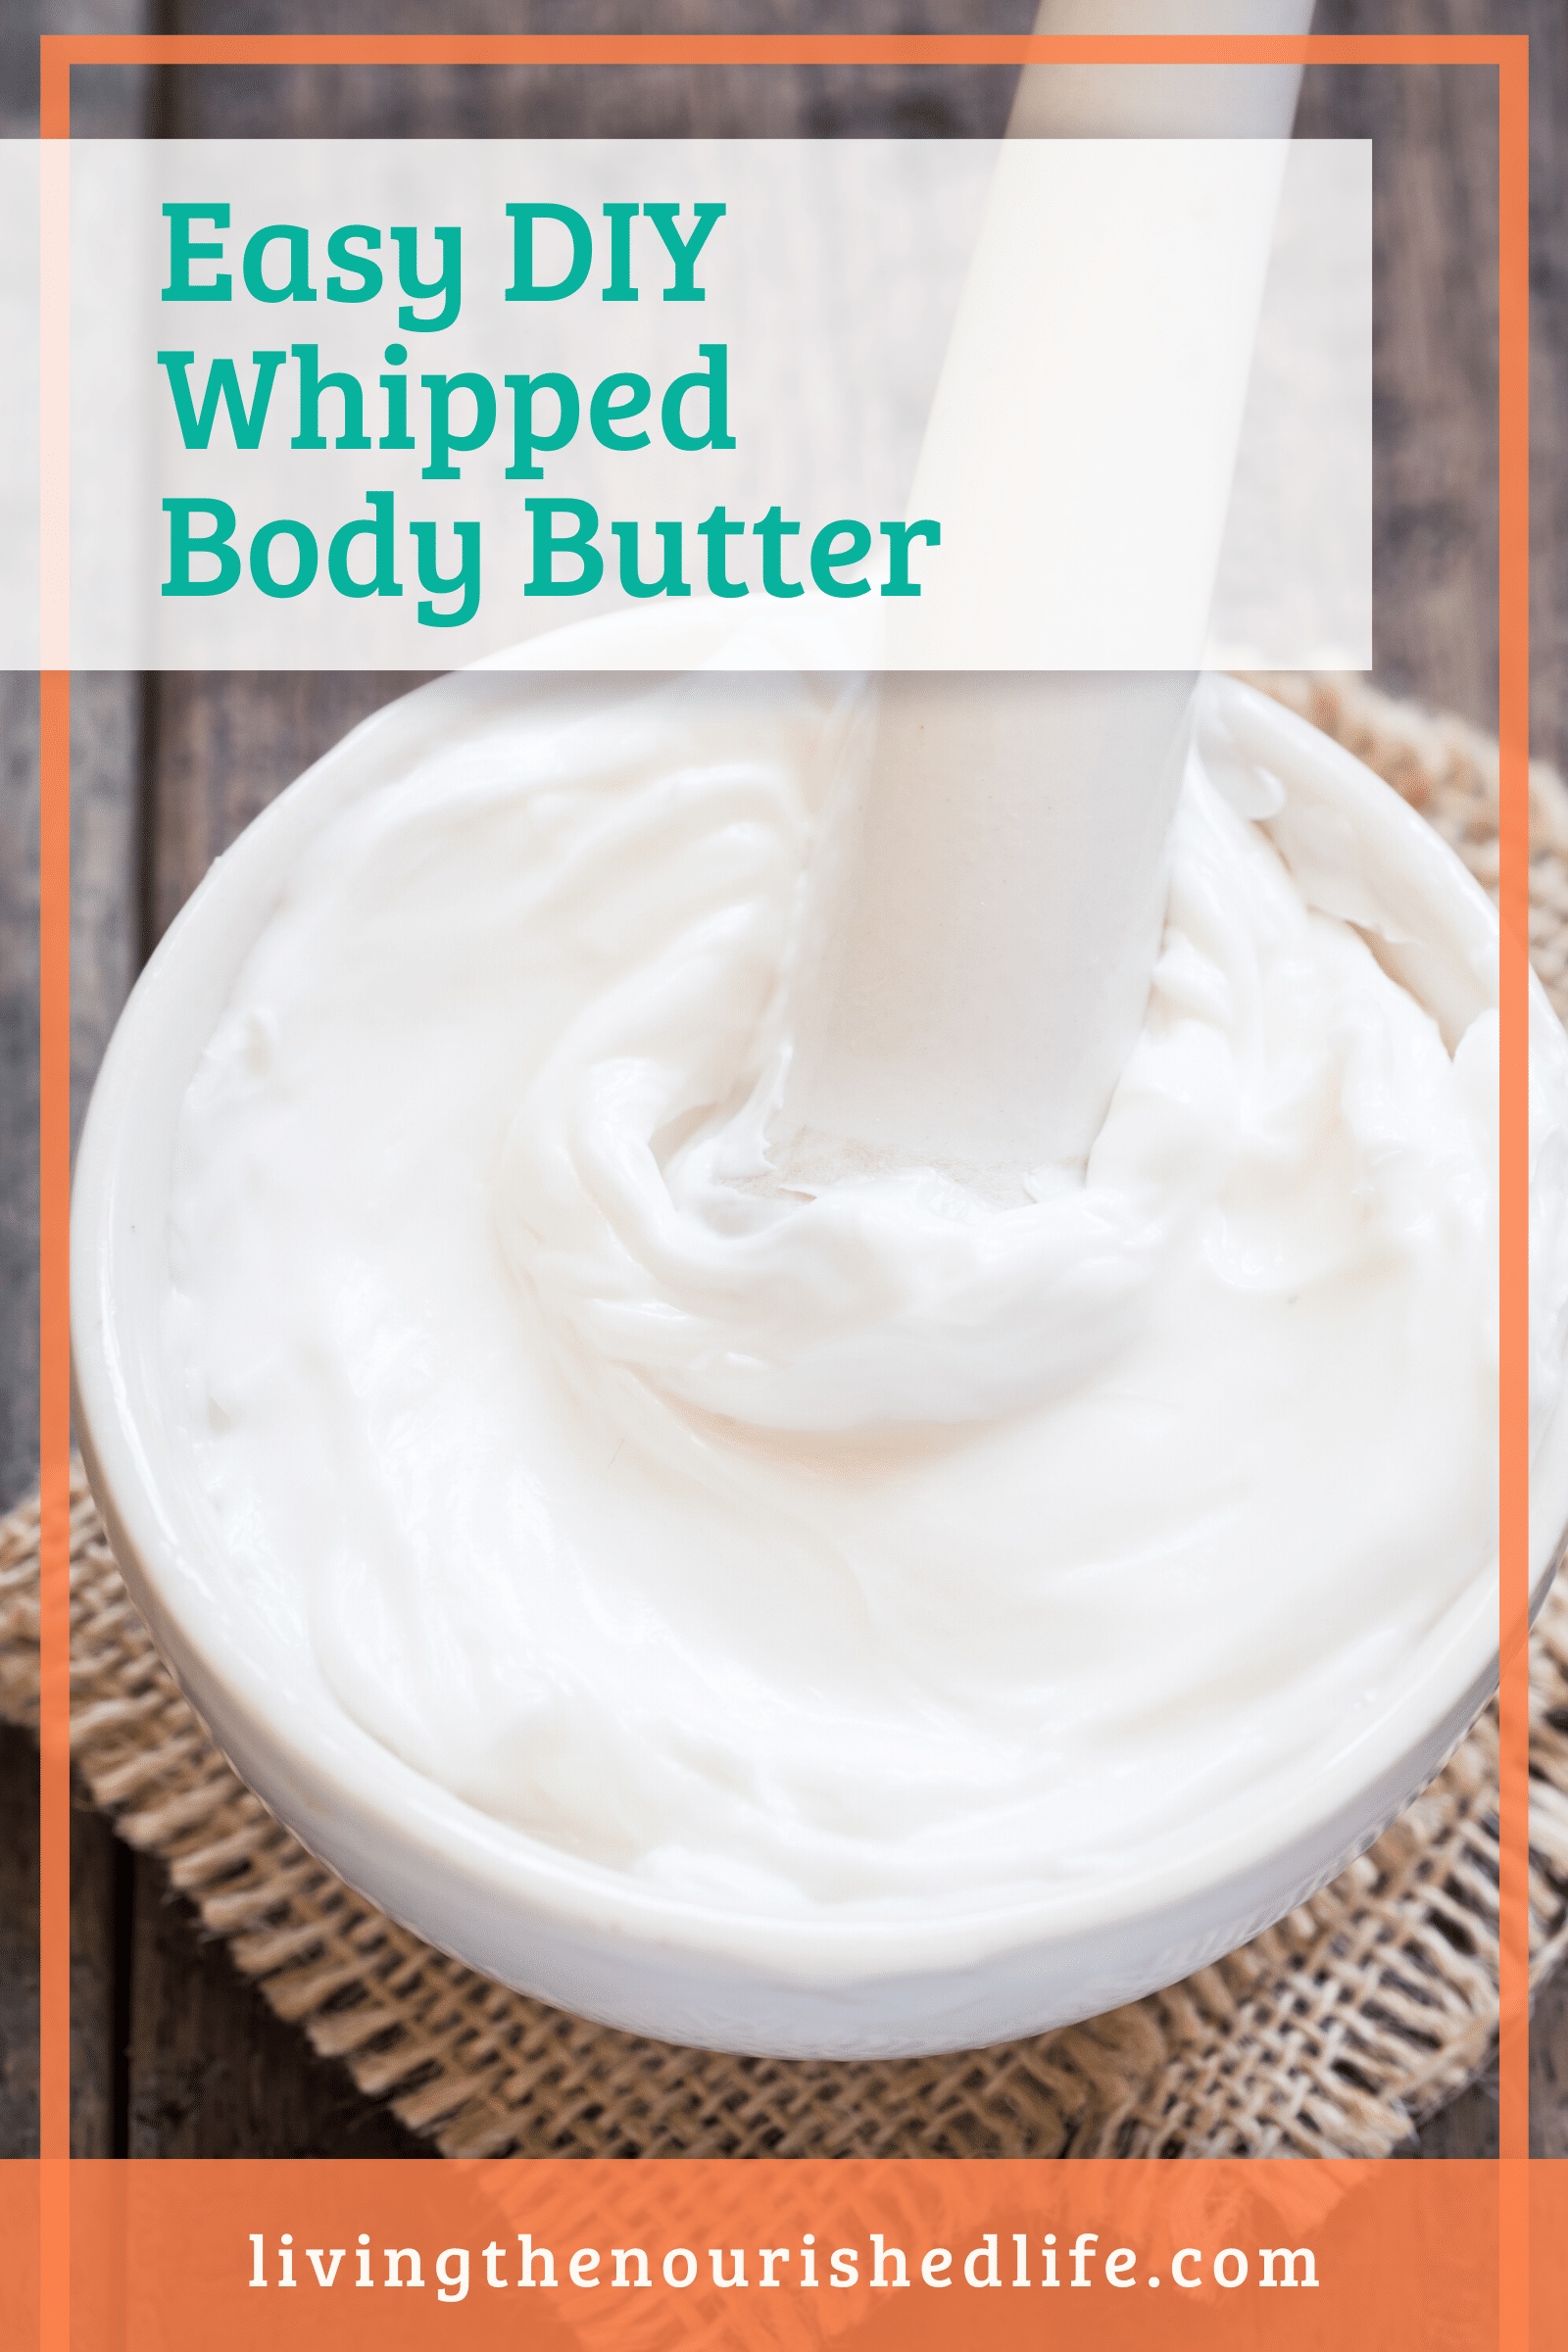 Best Coconut Body Butter | My Easy DIY Whipped Body Butter Recipe